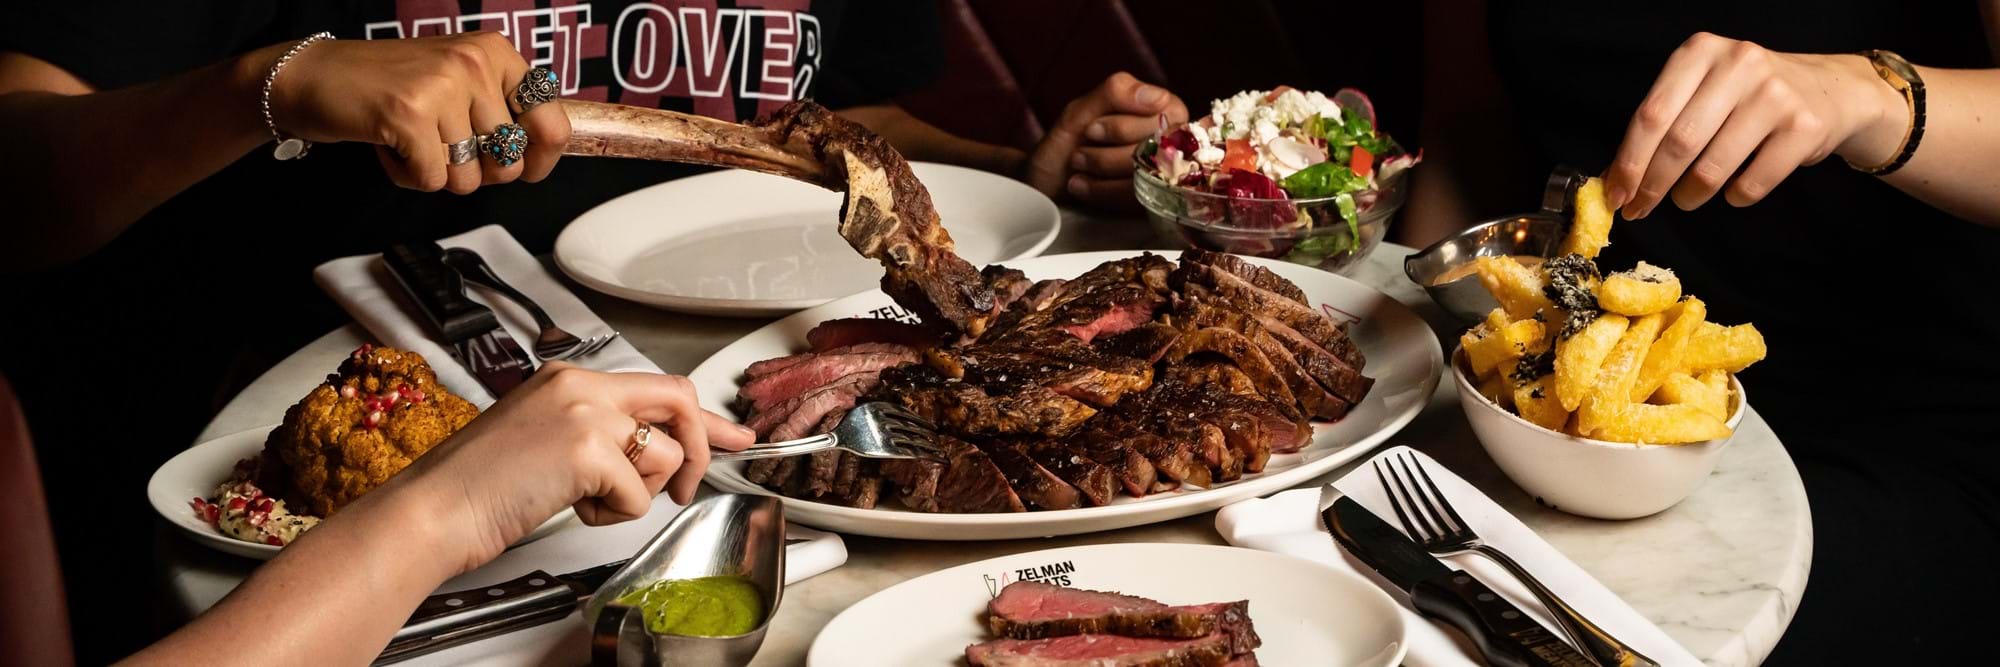 Couple Dining At Zelman Meats Restaurant In London